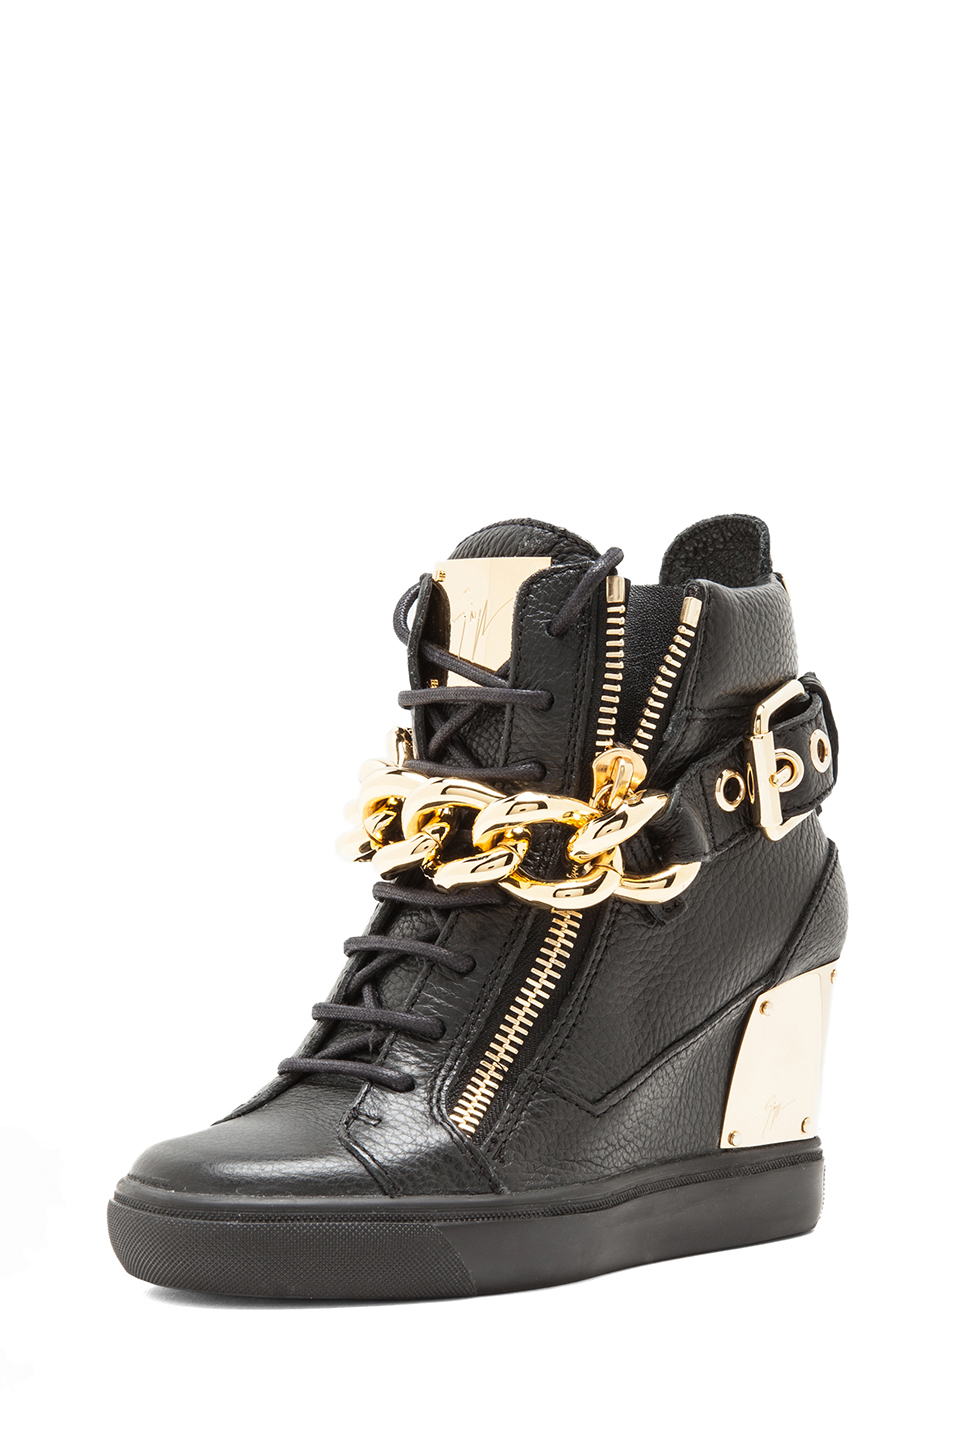 Giuseppe Zanotti Lorenz Grained Leather Wedge Sneakers with Chain in Black  - Lyst